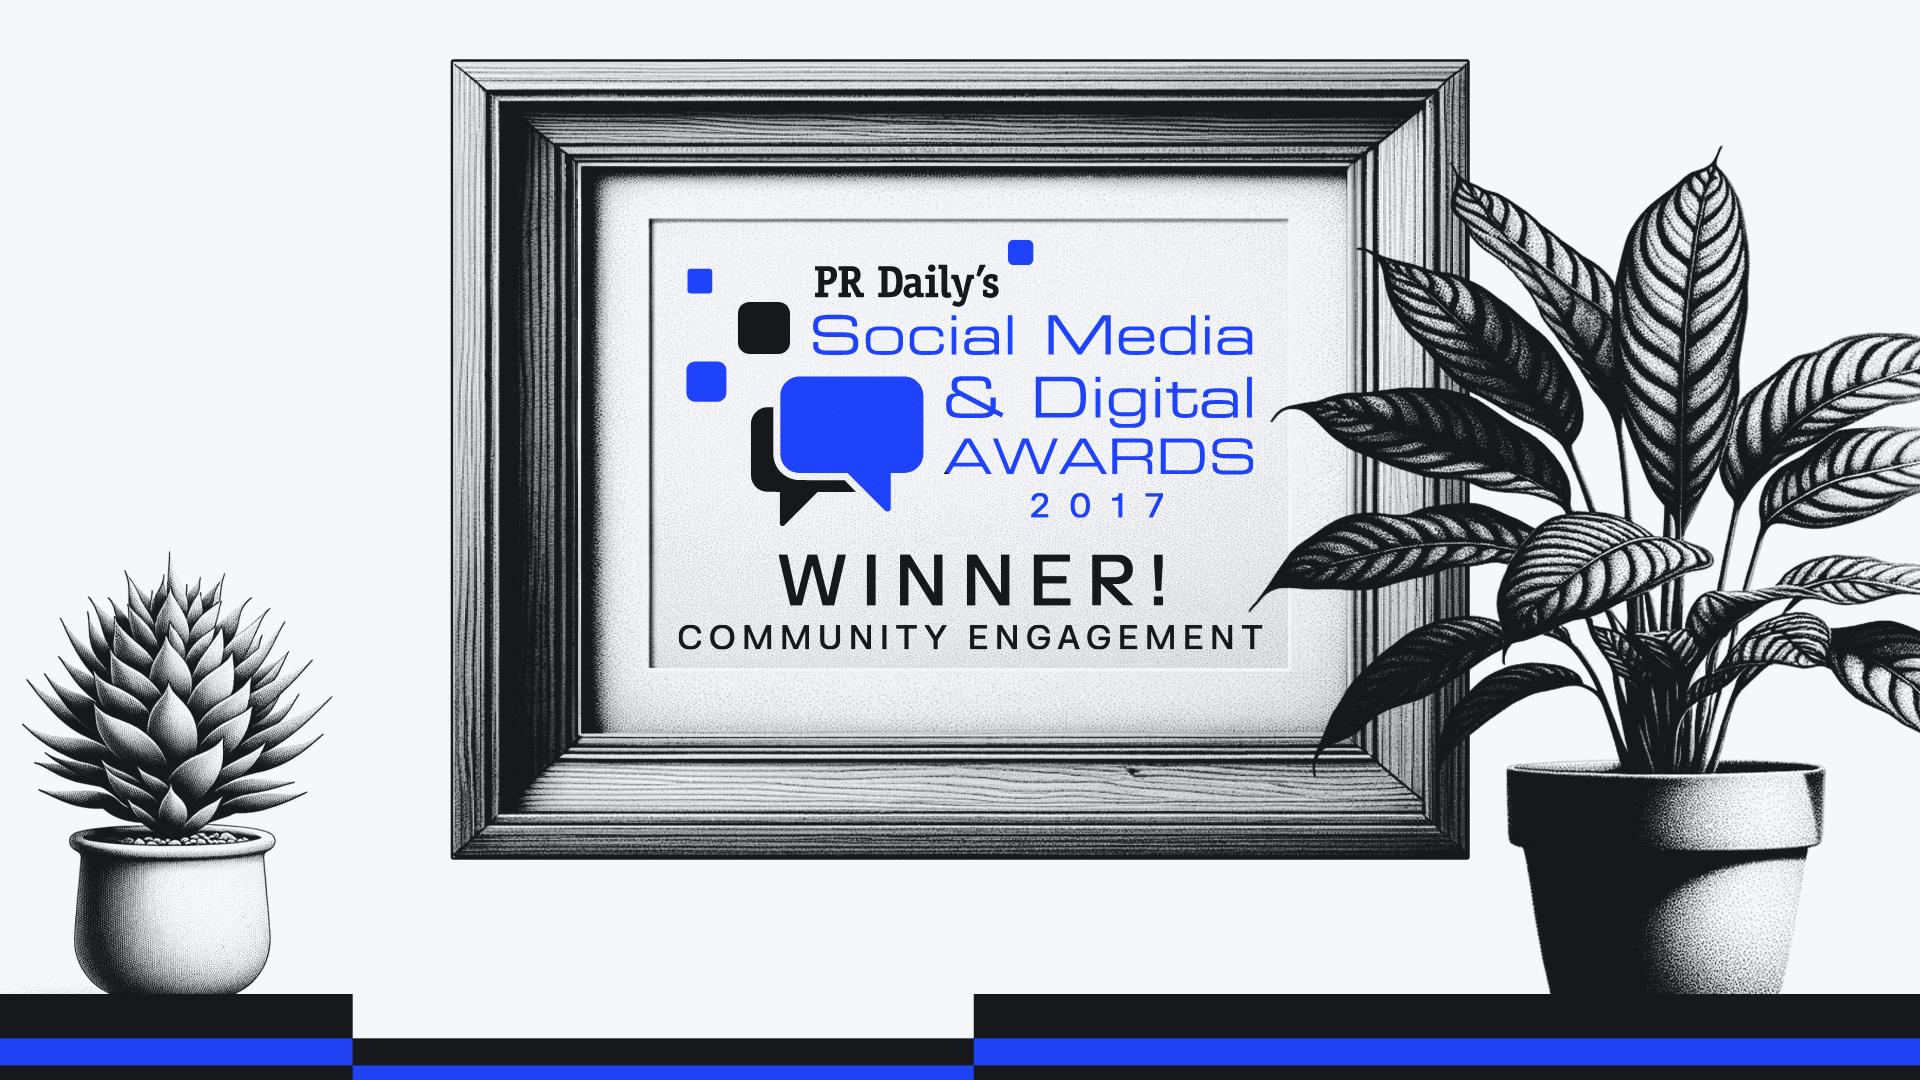 An award for Community Engagement by PR Daily's Social Media & Digital Awards 2017 is displayed, flanked by illustrated plants.